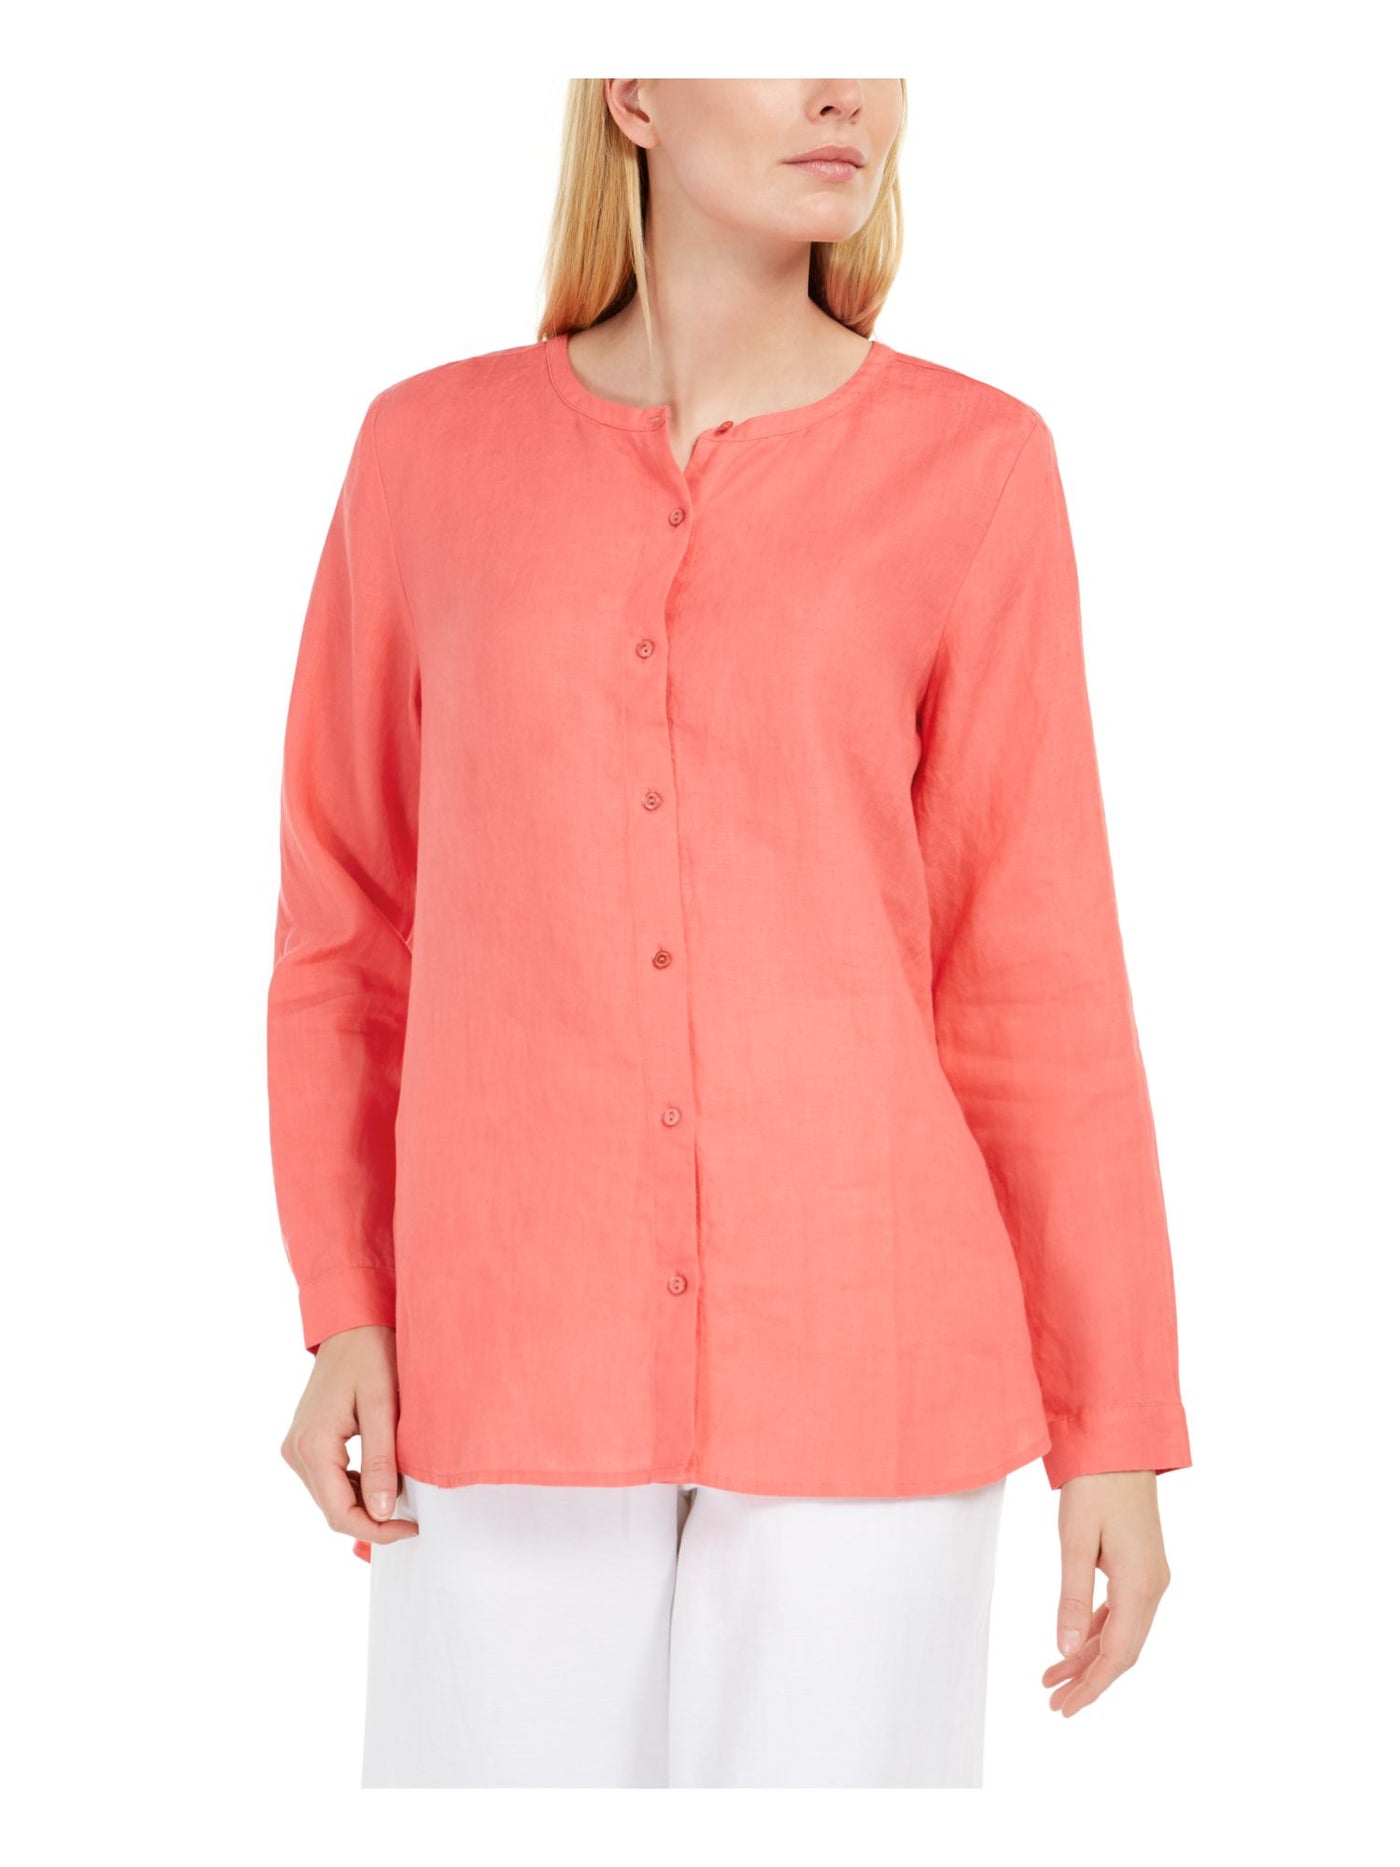 EILEEN FISHER Womens Pink Long Sleeve Jewel Neck Button Up Top S